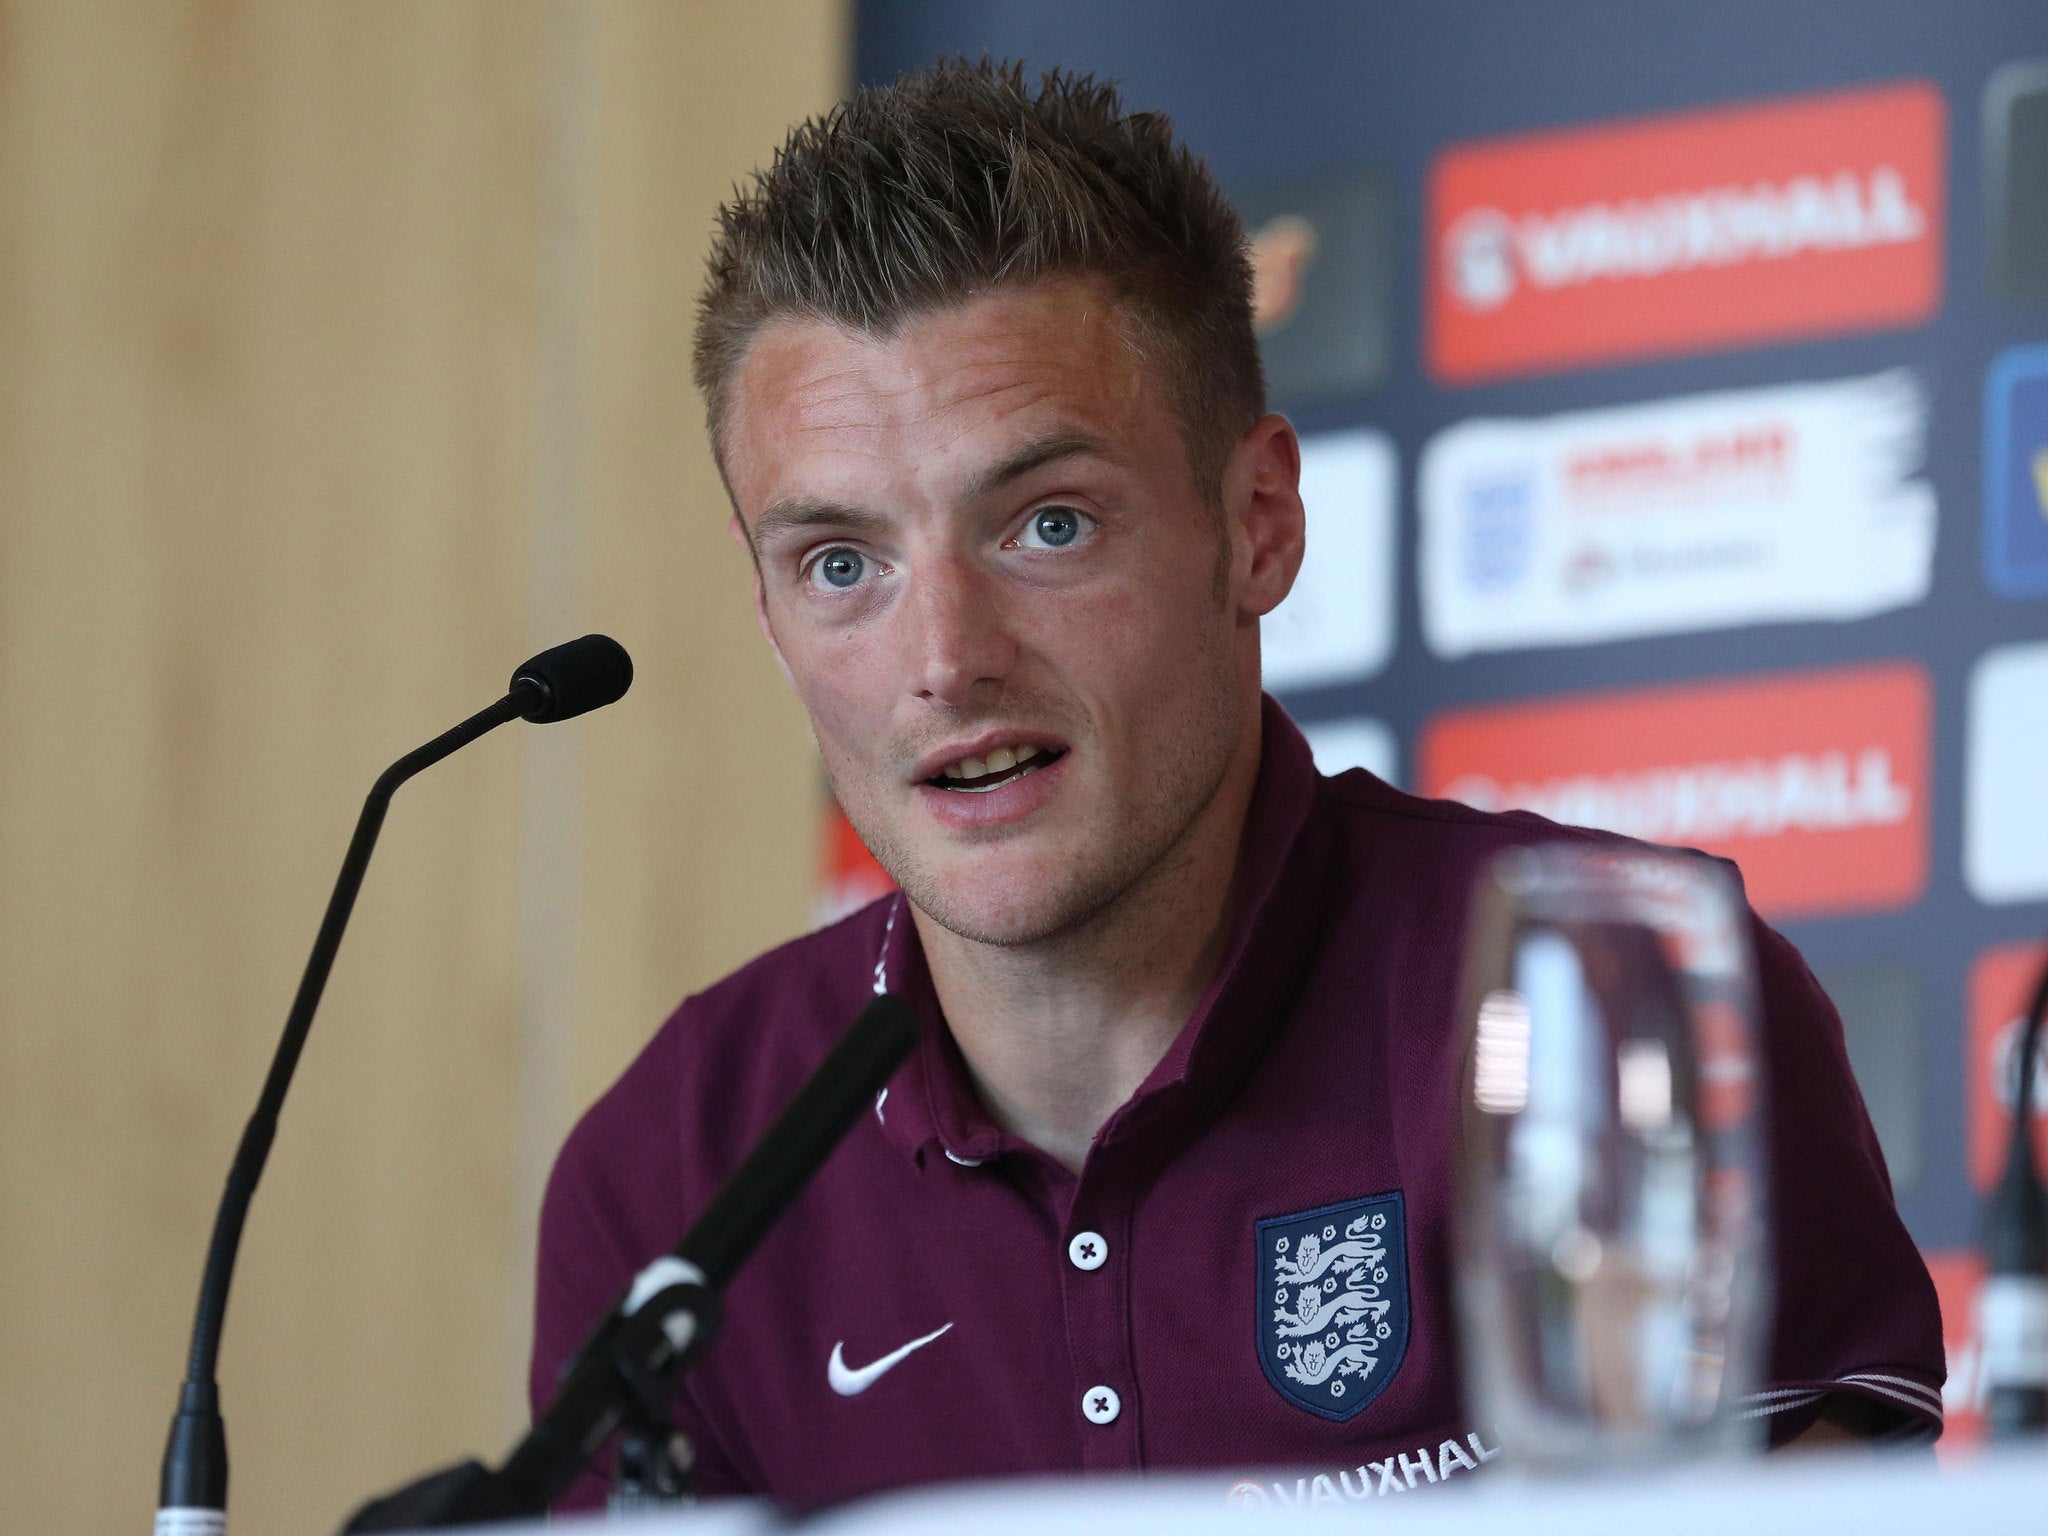 Jamie Vardy, Leicester City FC striker, apologised for his racist outburst